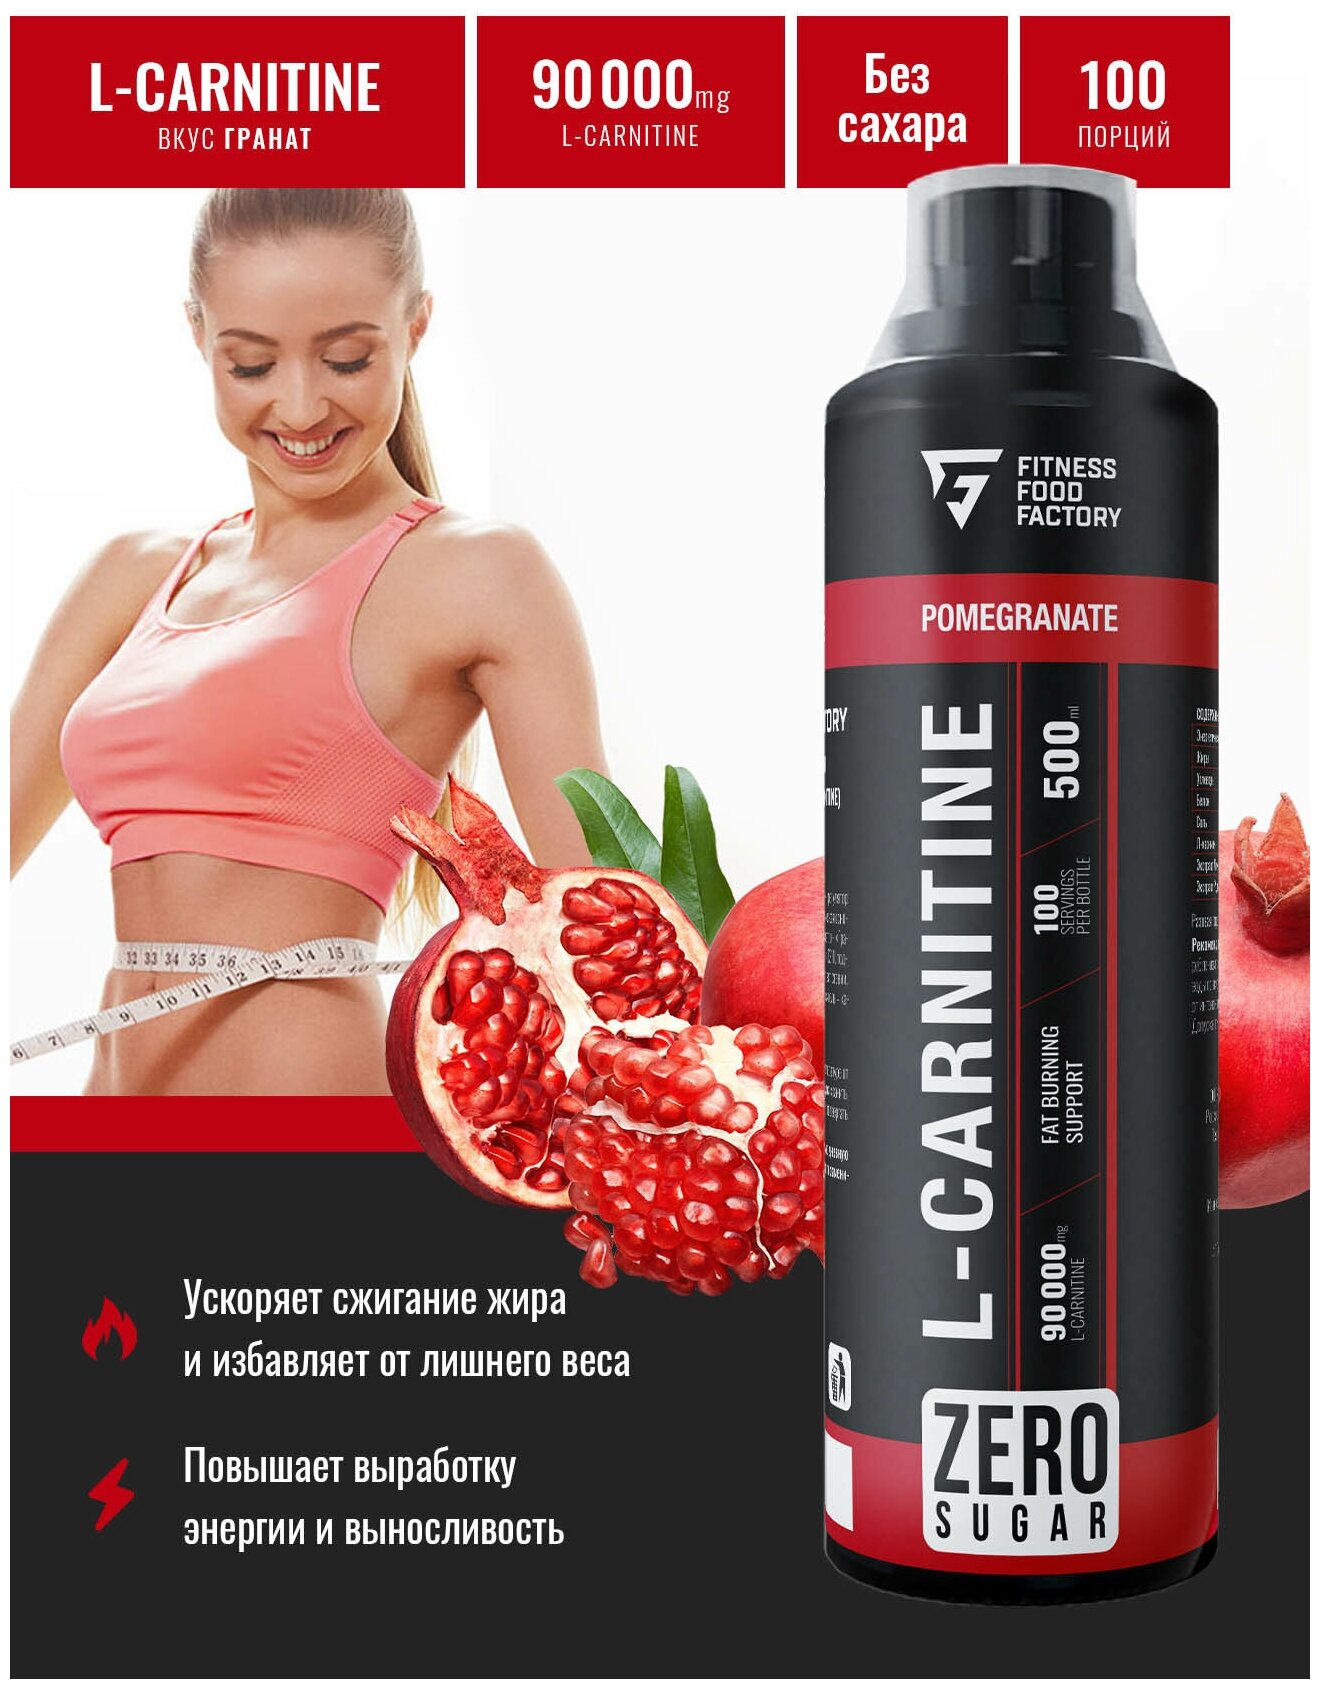 Fitness Food Factory L-Carnitine 90.000 мг (500 мл) (гранат)